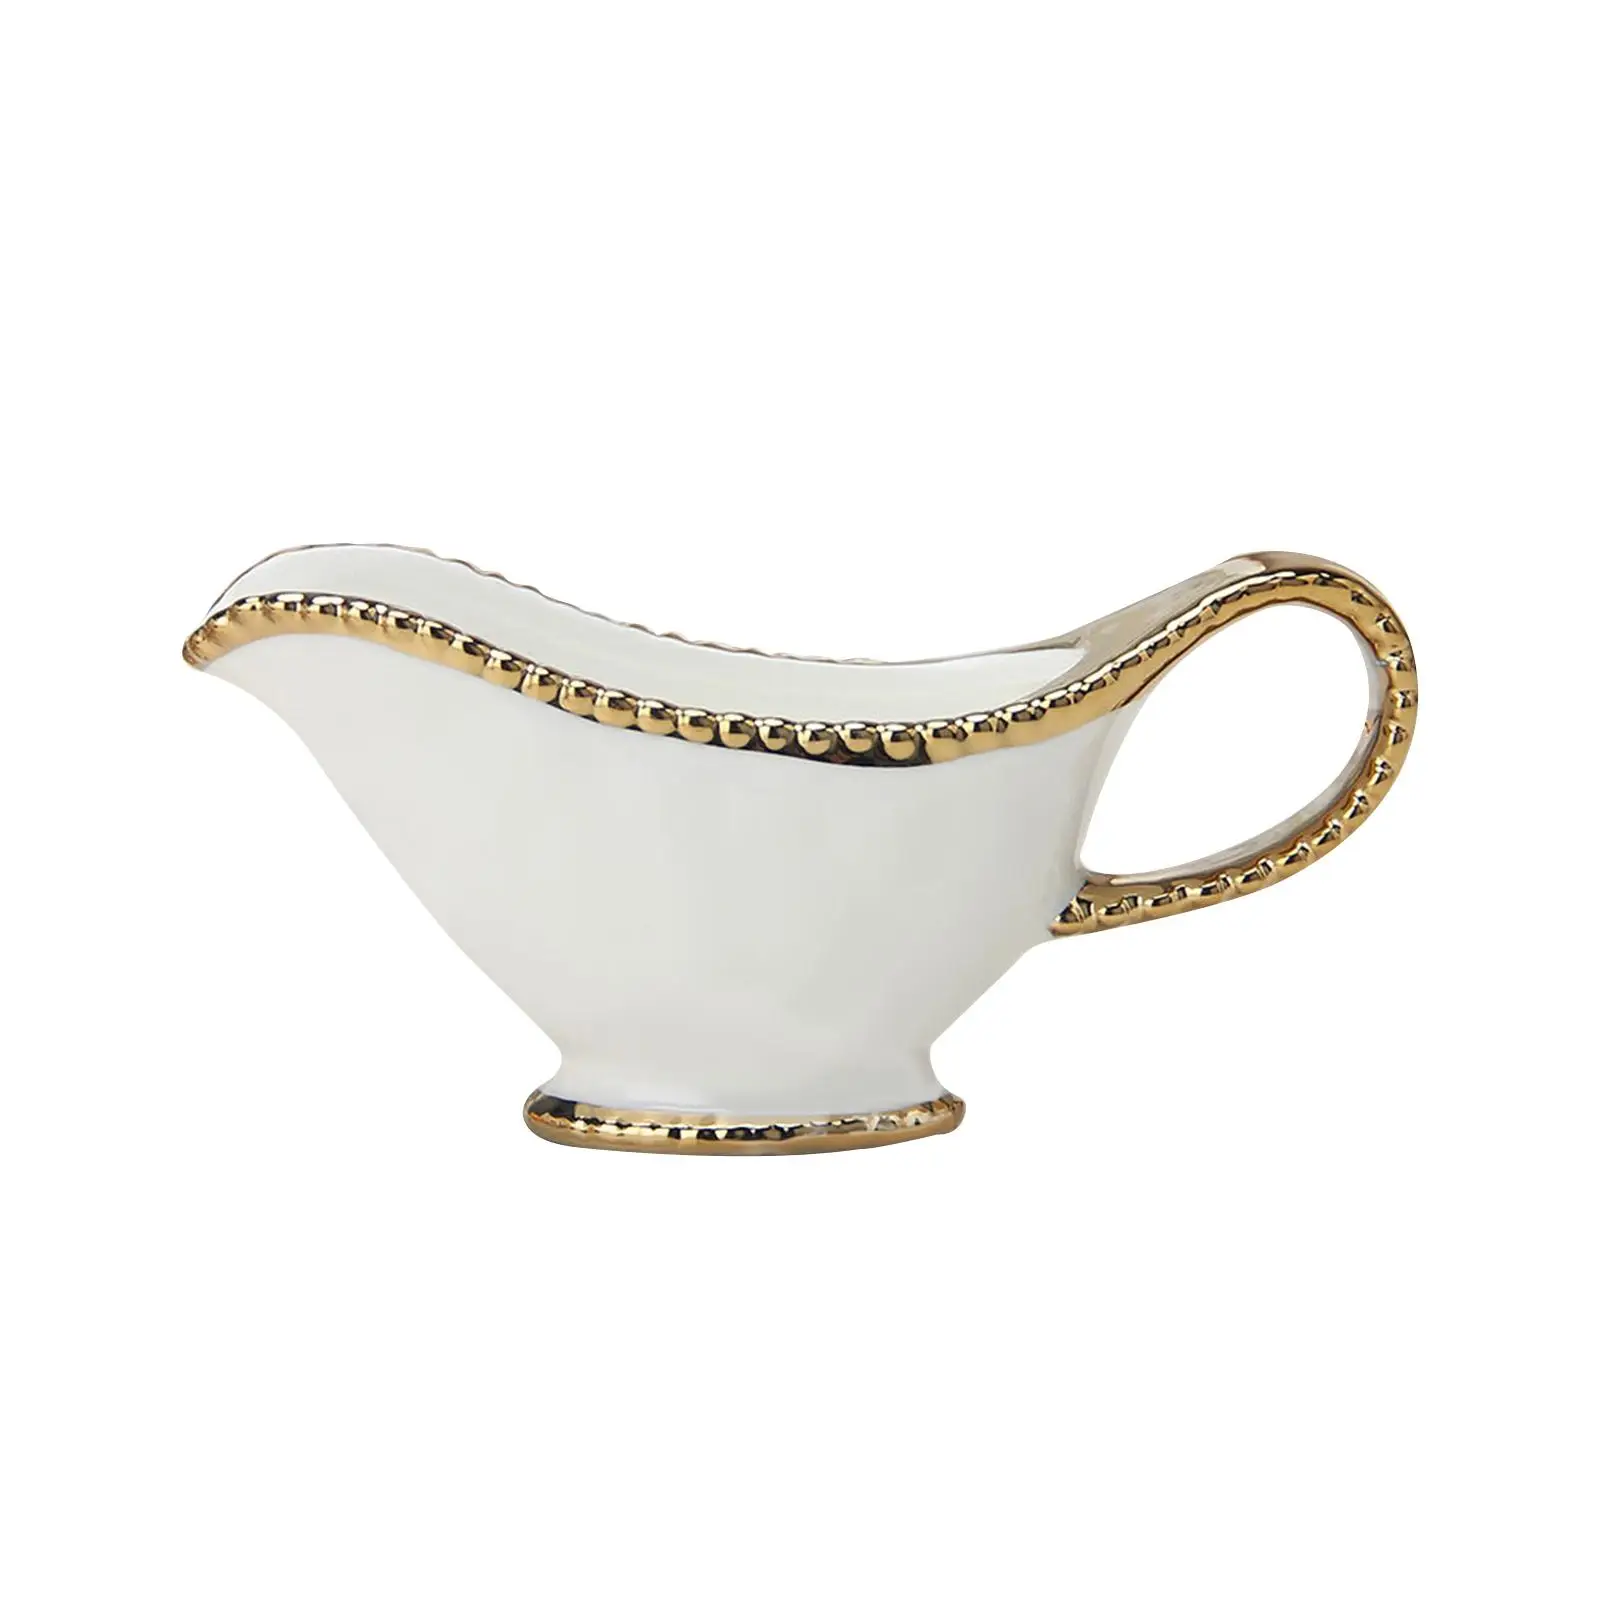 Porcelain Gravy Boat Accesory Sauce Boat Container for Beefsteak Dining Milk